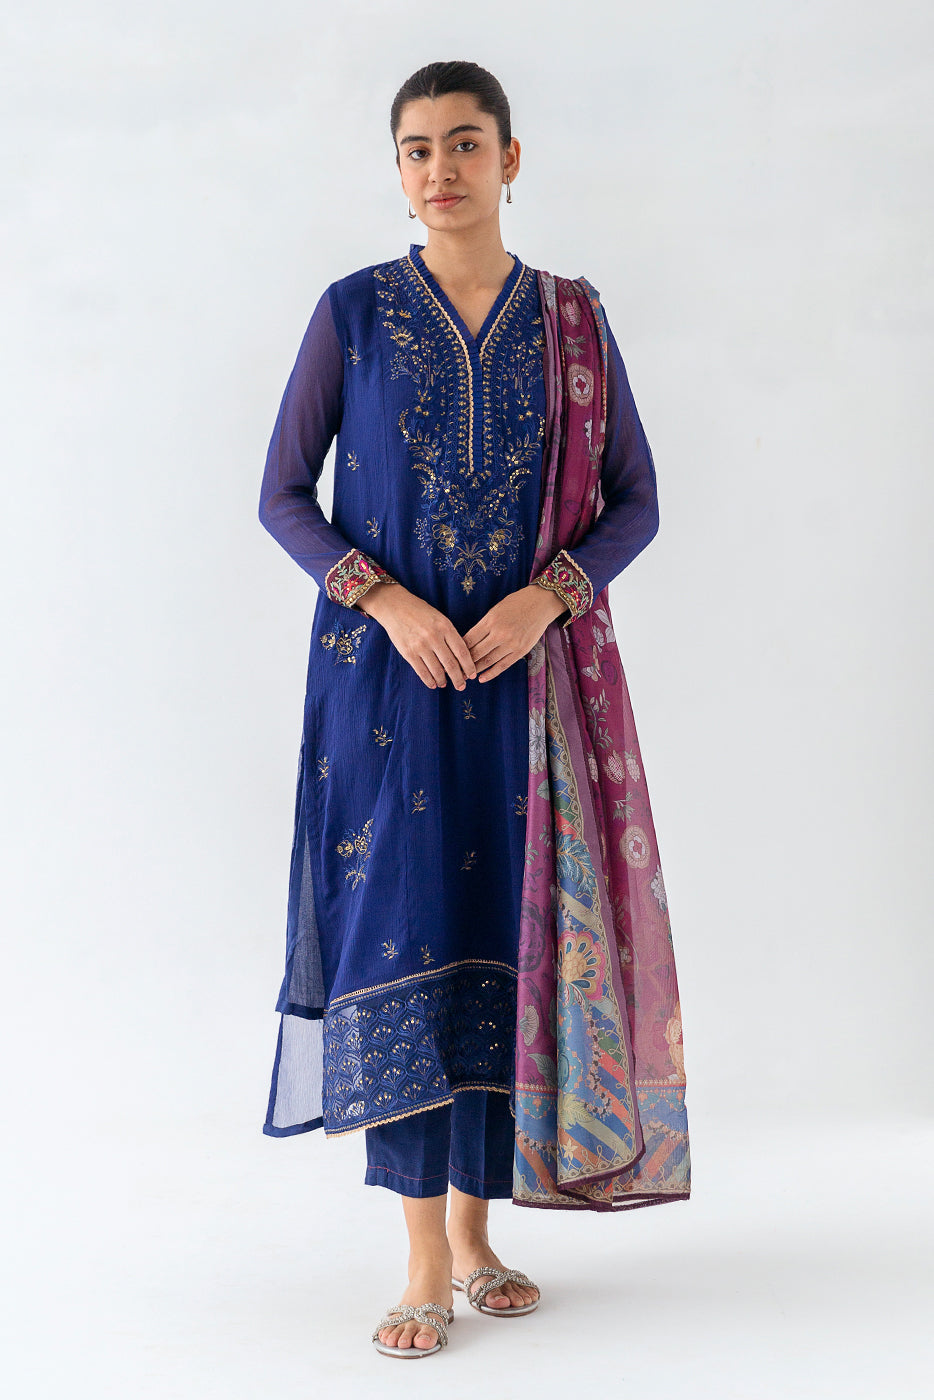 Embroidered Shirt With Dupatta - BEECHTREE